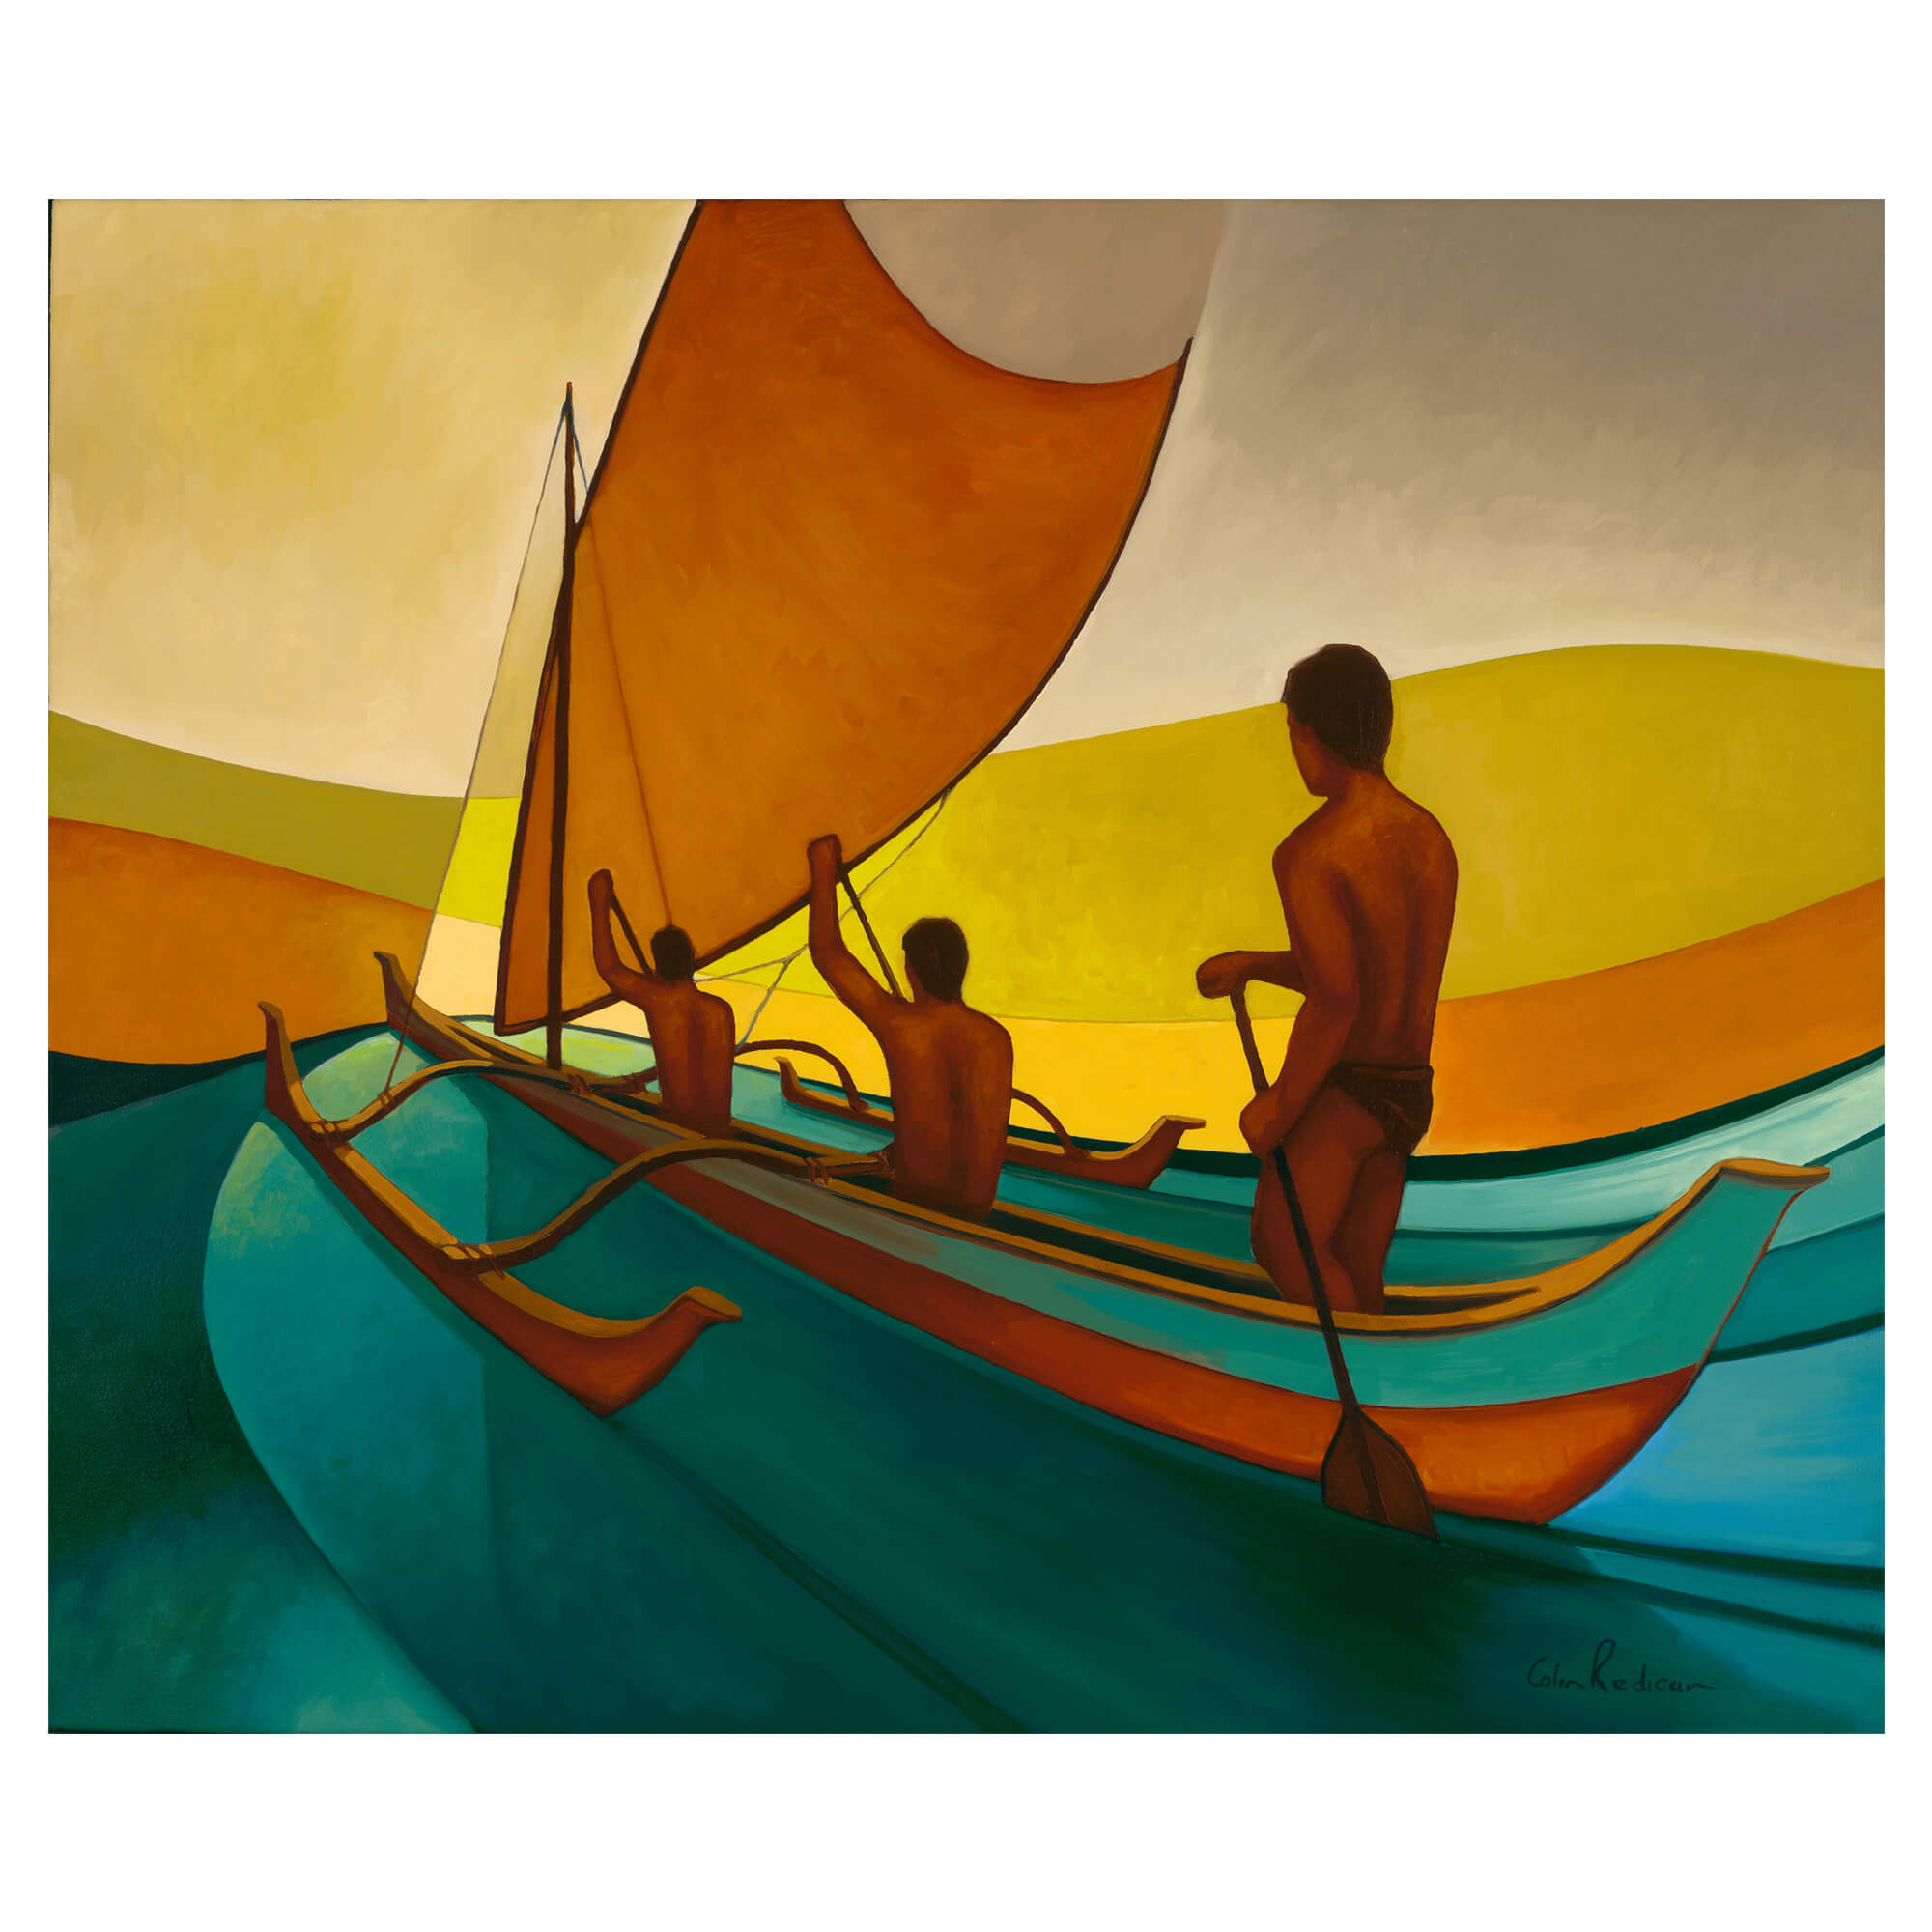 Men prepared to embark on an adventure by Hawaii artist Colin Redican